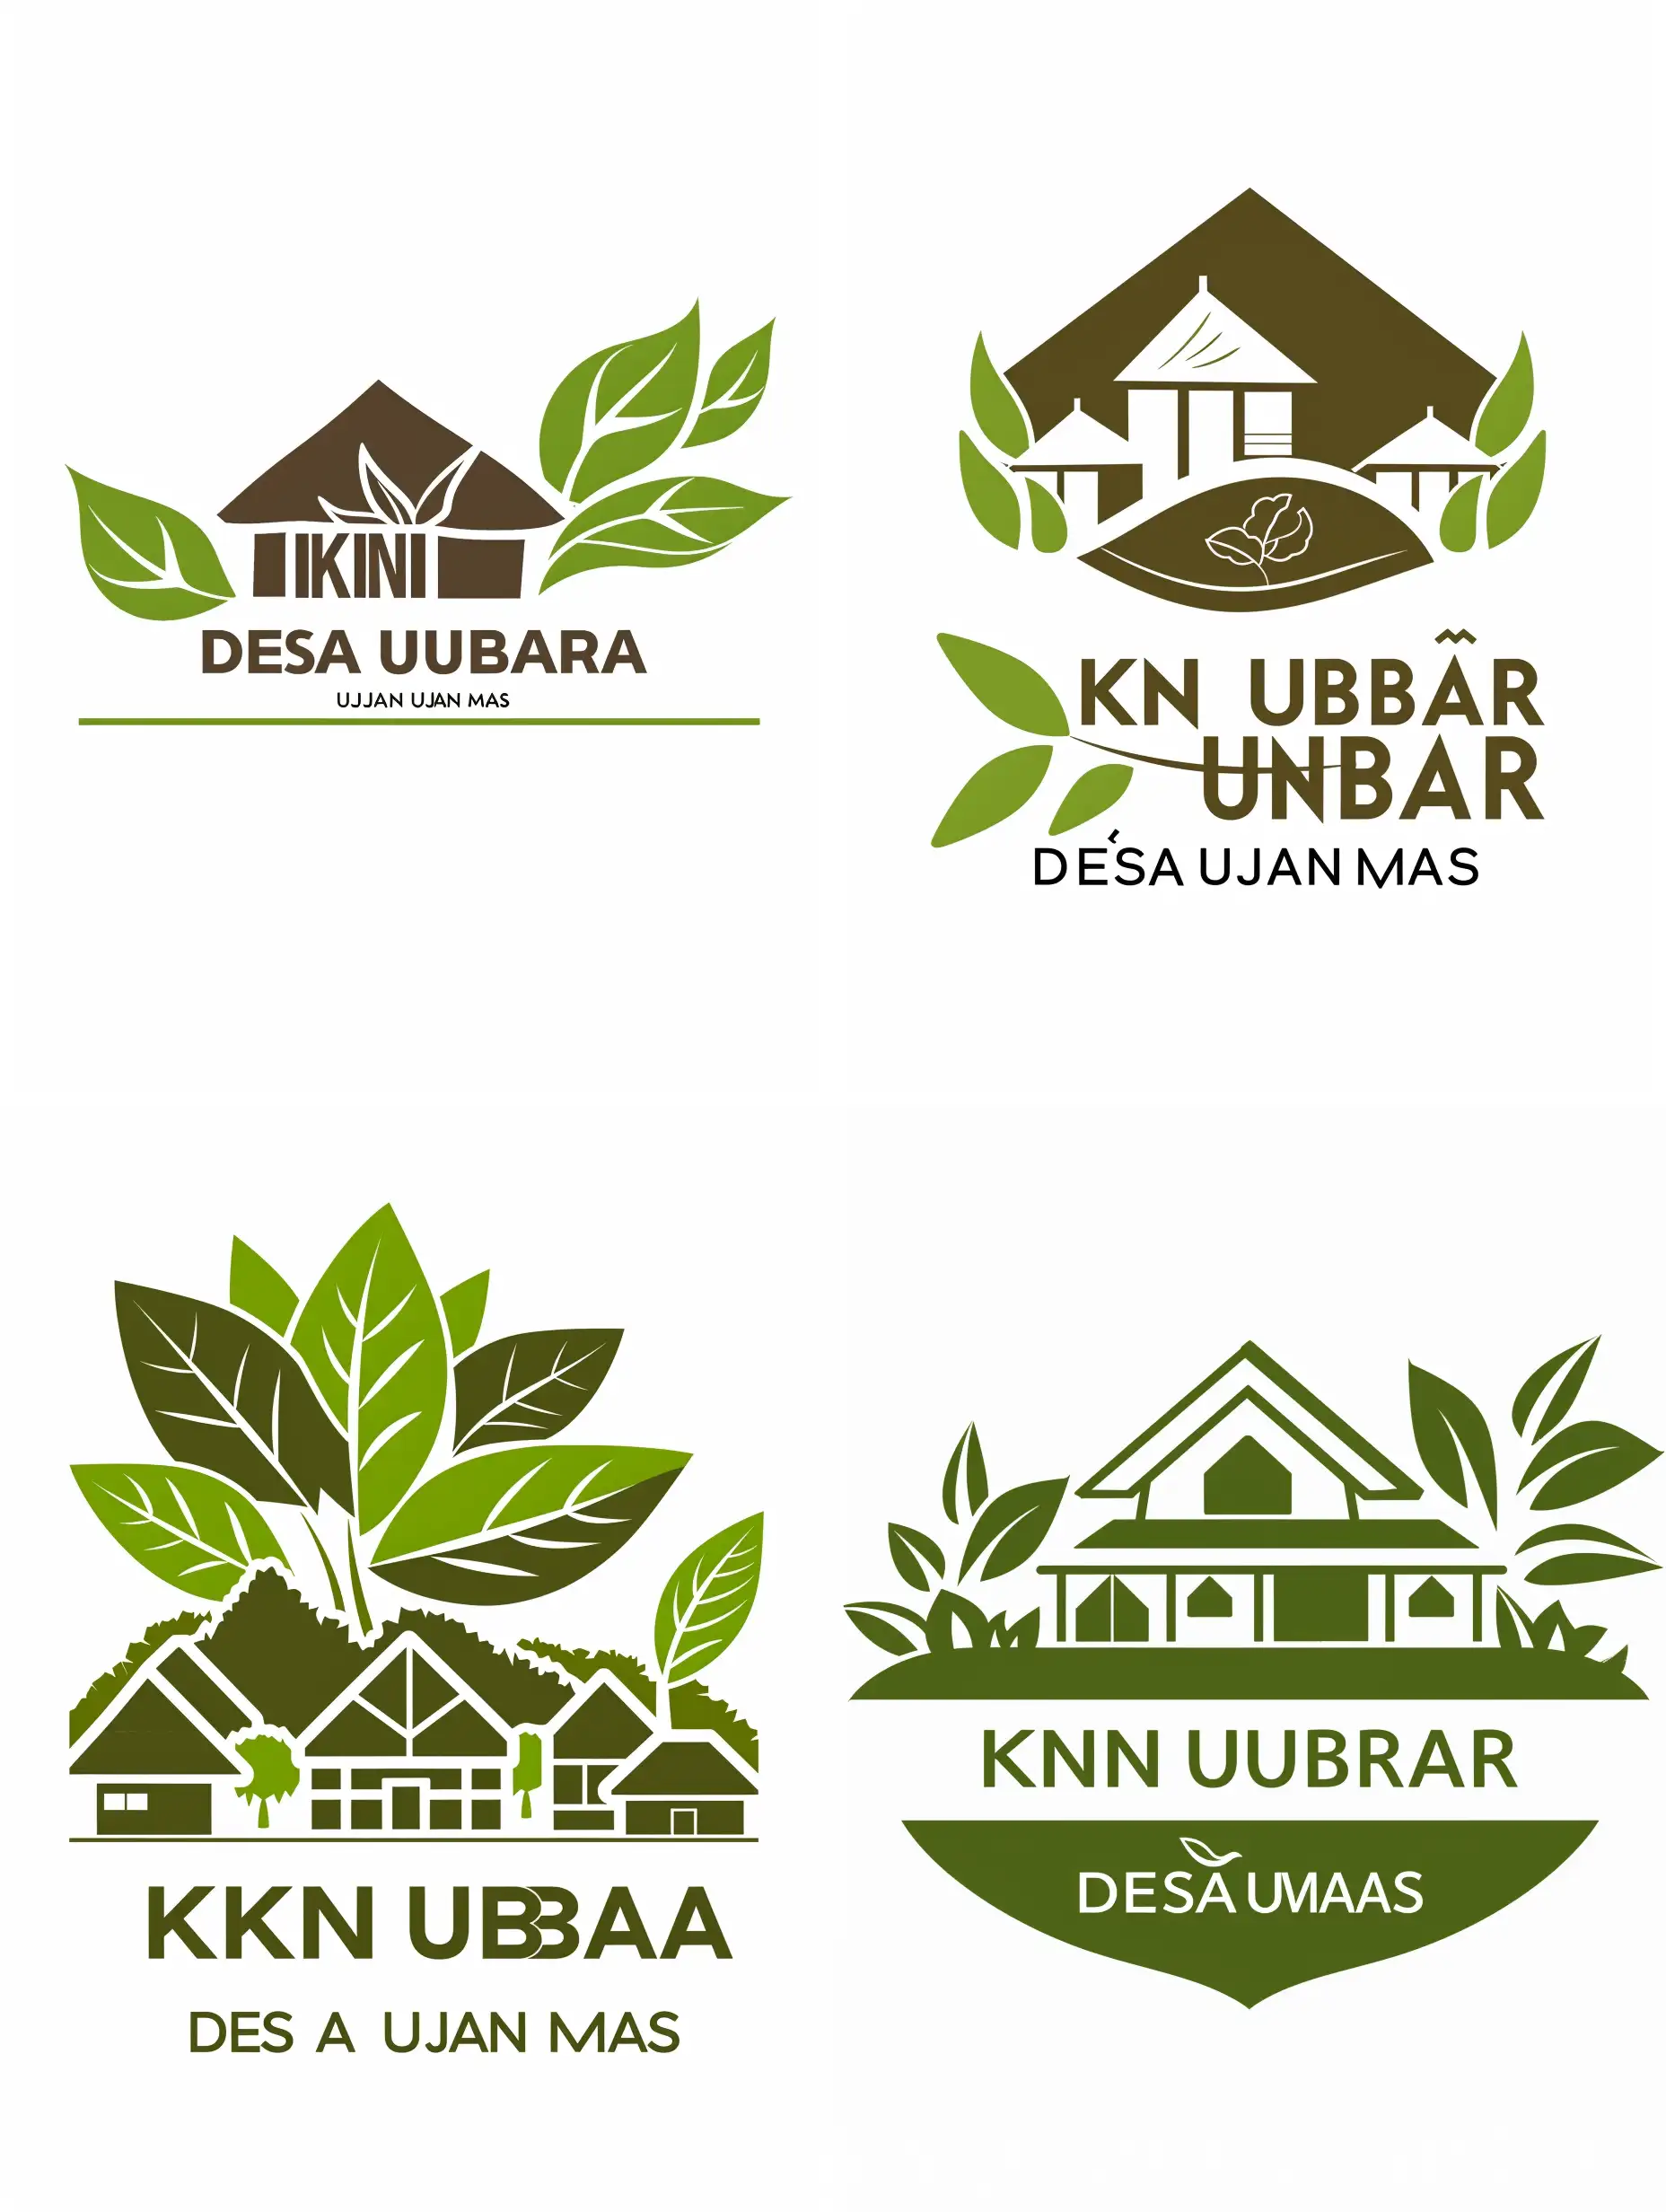 create a logo with the name "KKN UNBARA" with the slogan "DESA UJAN MAS" with an image component containing a village and leaves.